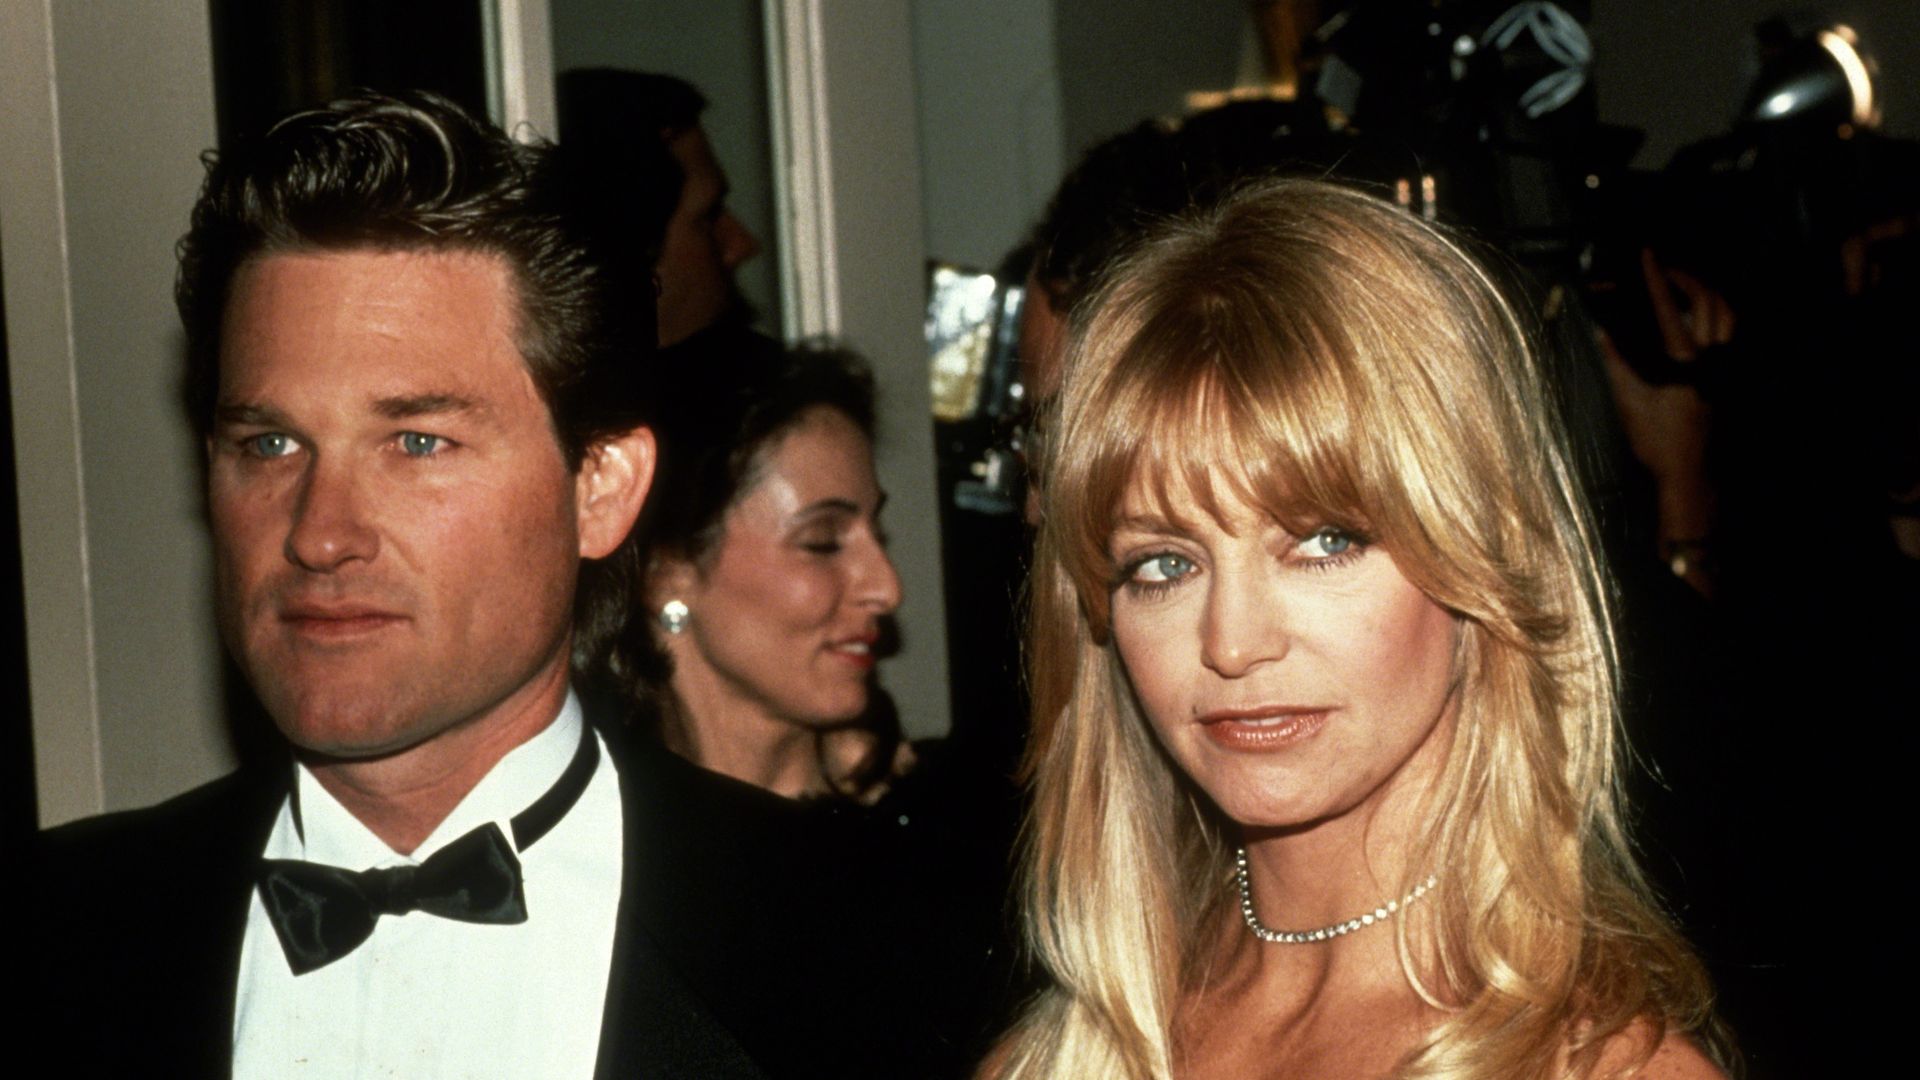 Kurt Russell and Goldie Hawn circa 1990 in New York City